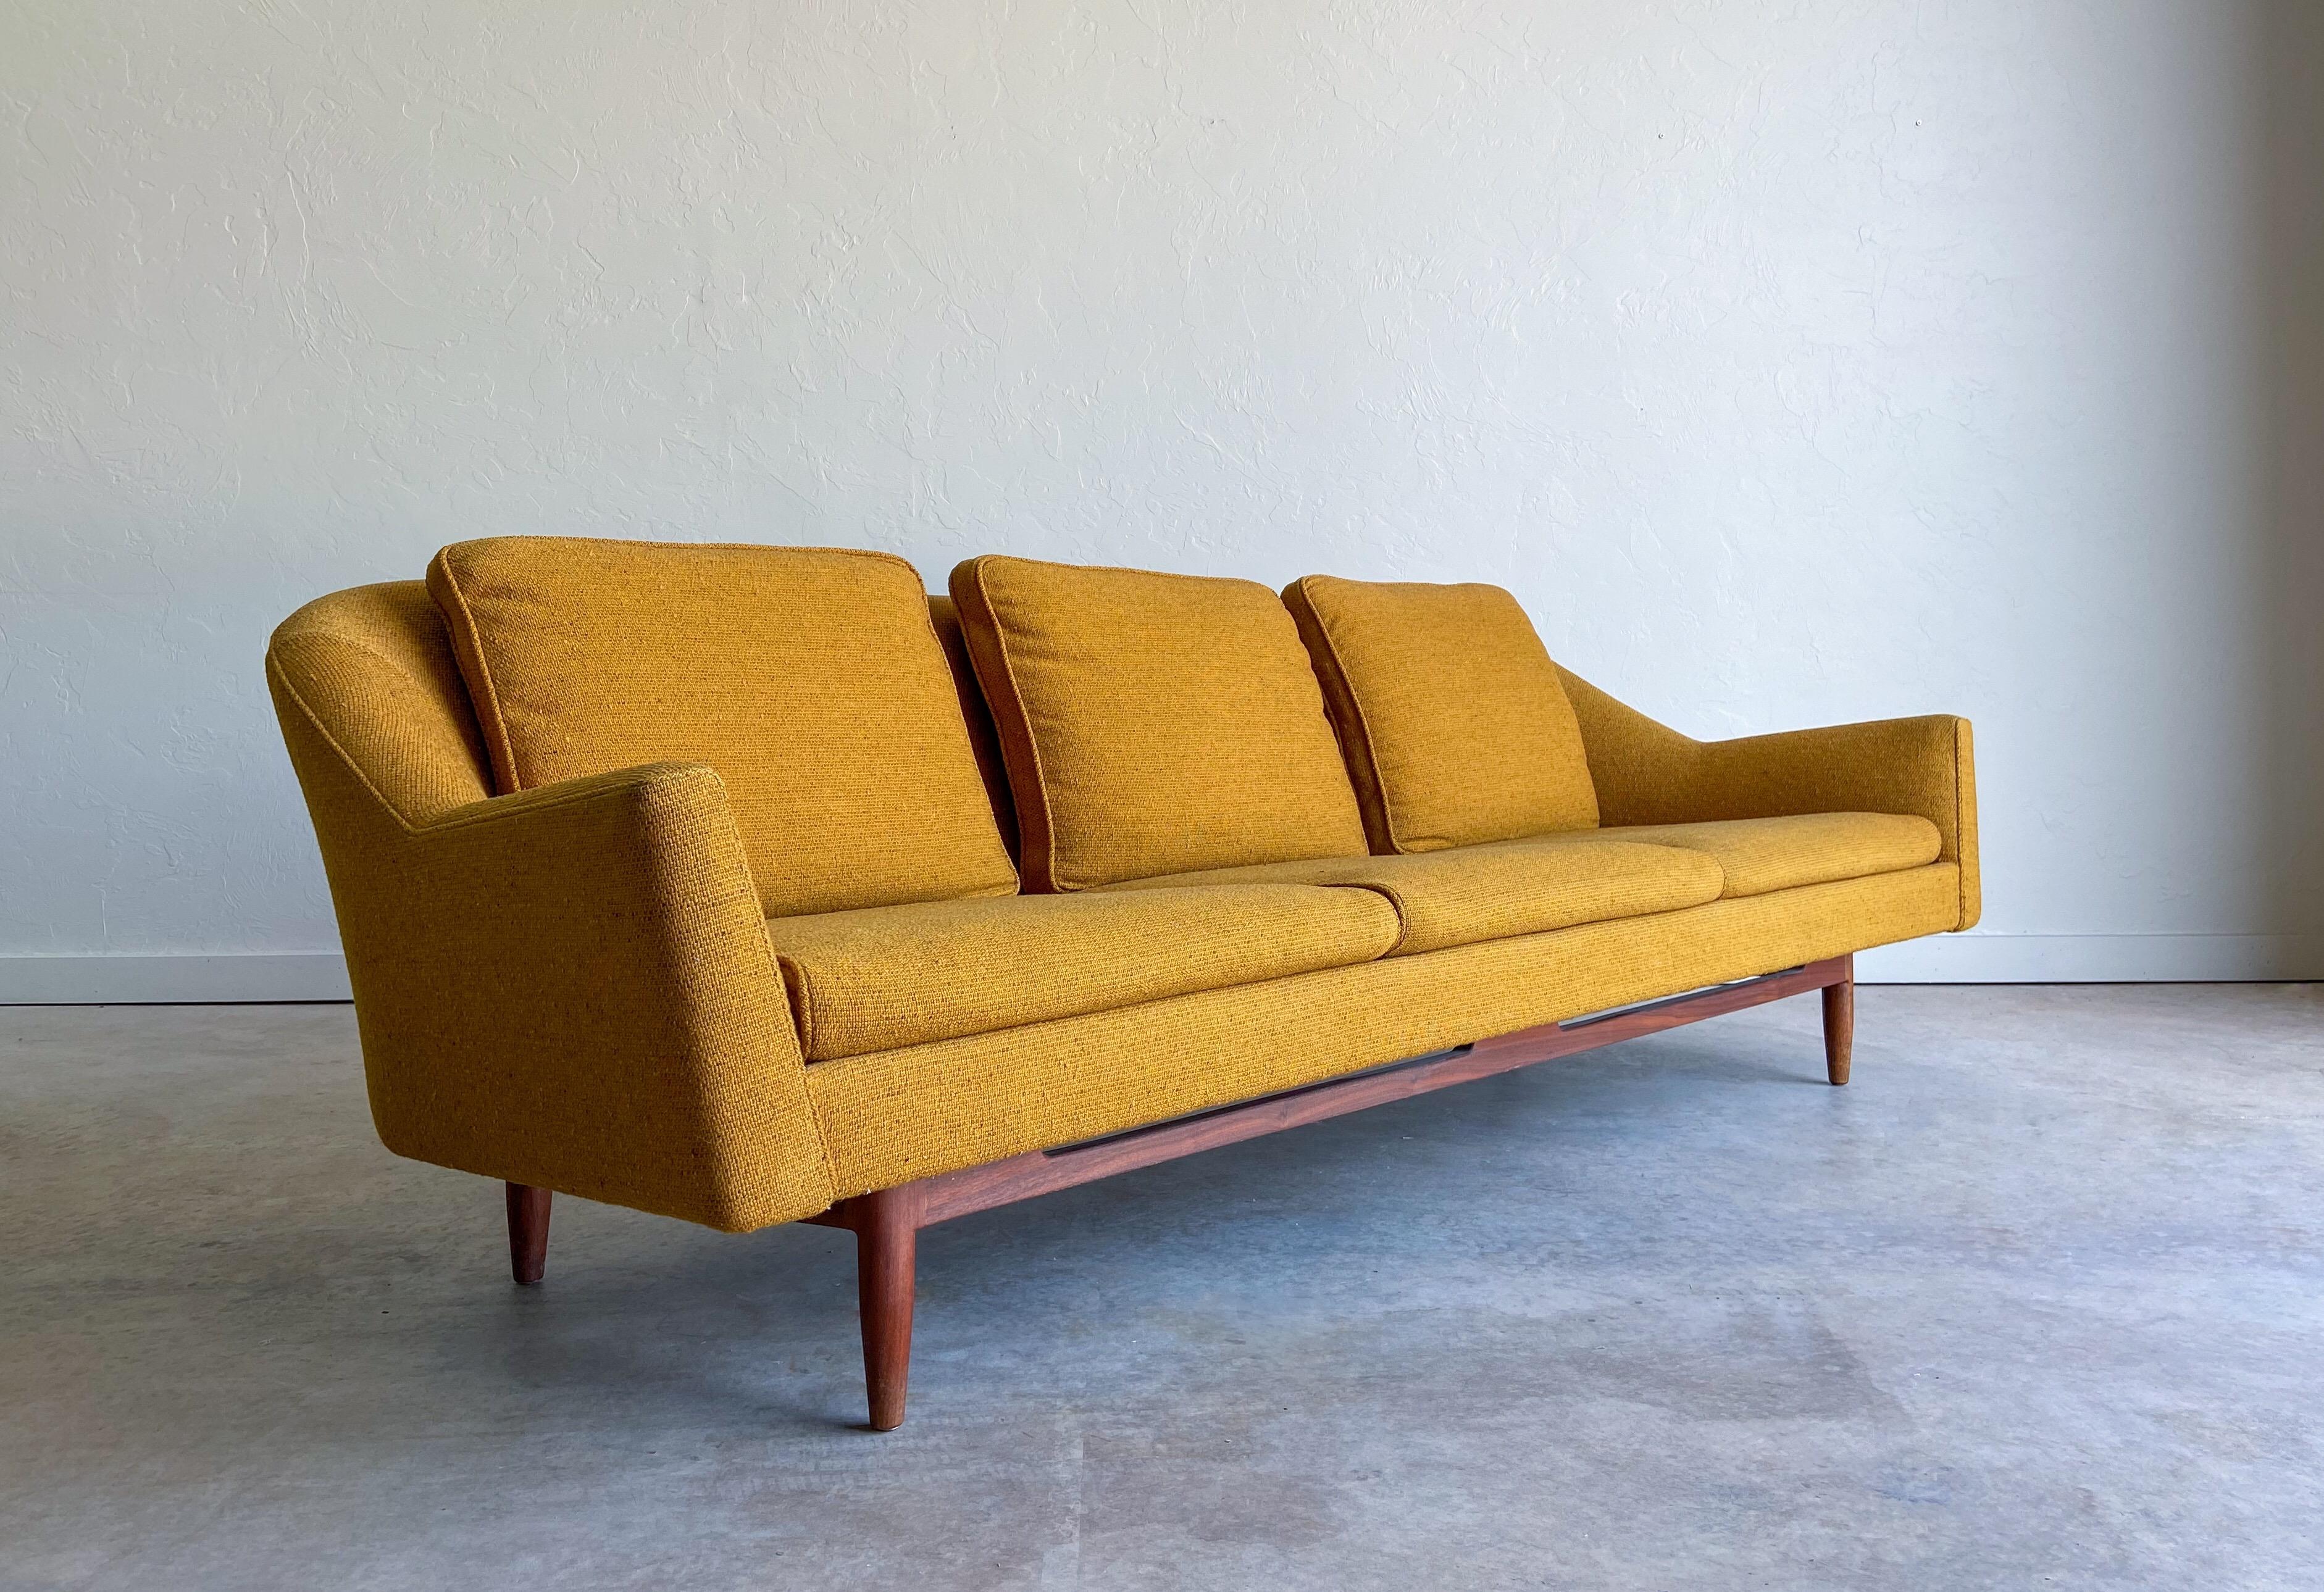 A Danish modern sofa designed by Jens Risom for Jens Risom Design Inc. Form and function come together on this beautiful and comfortable sofa.